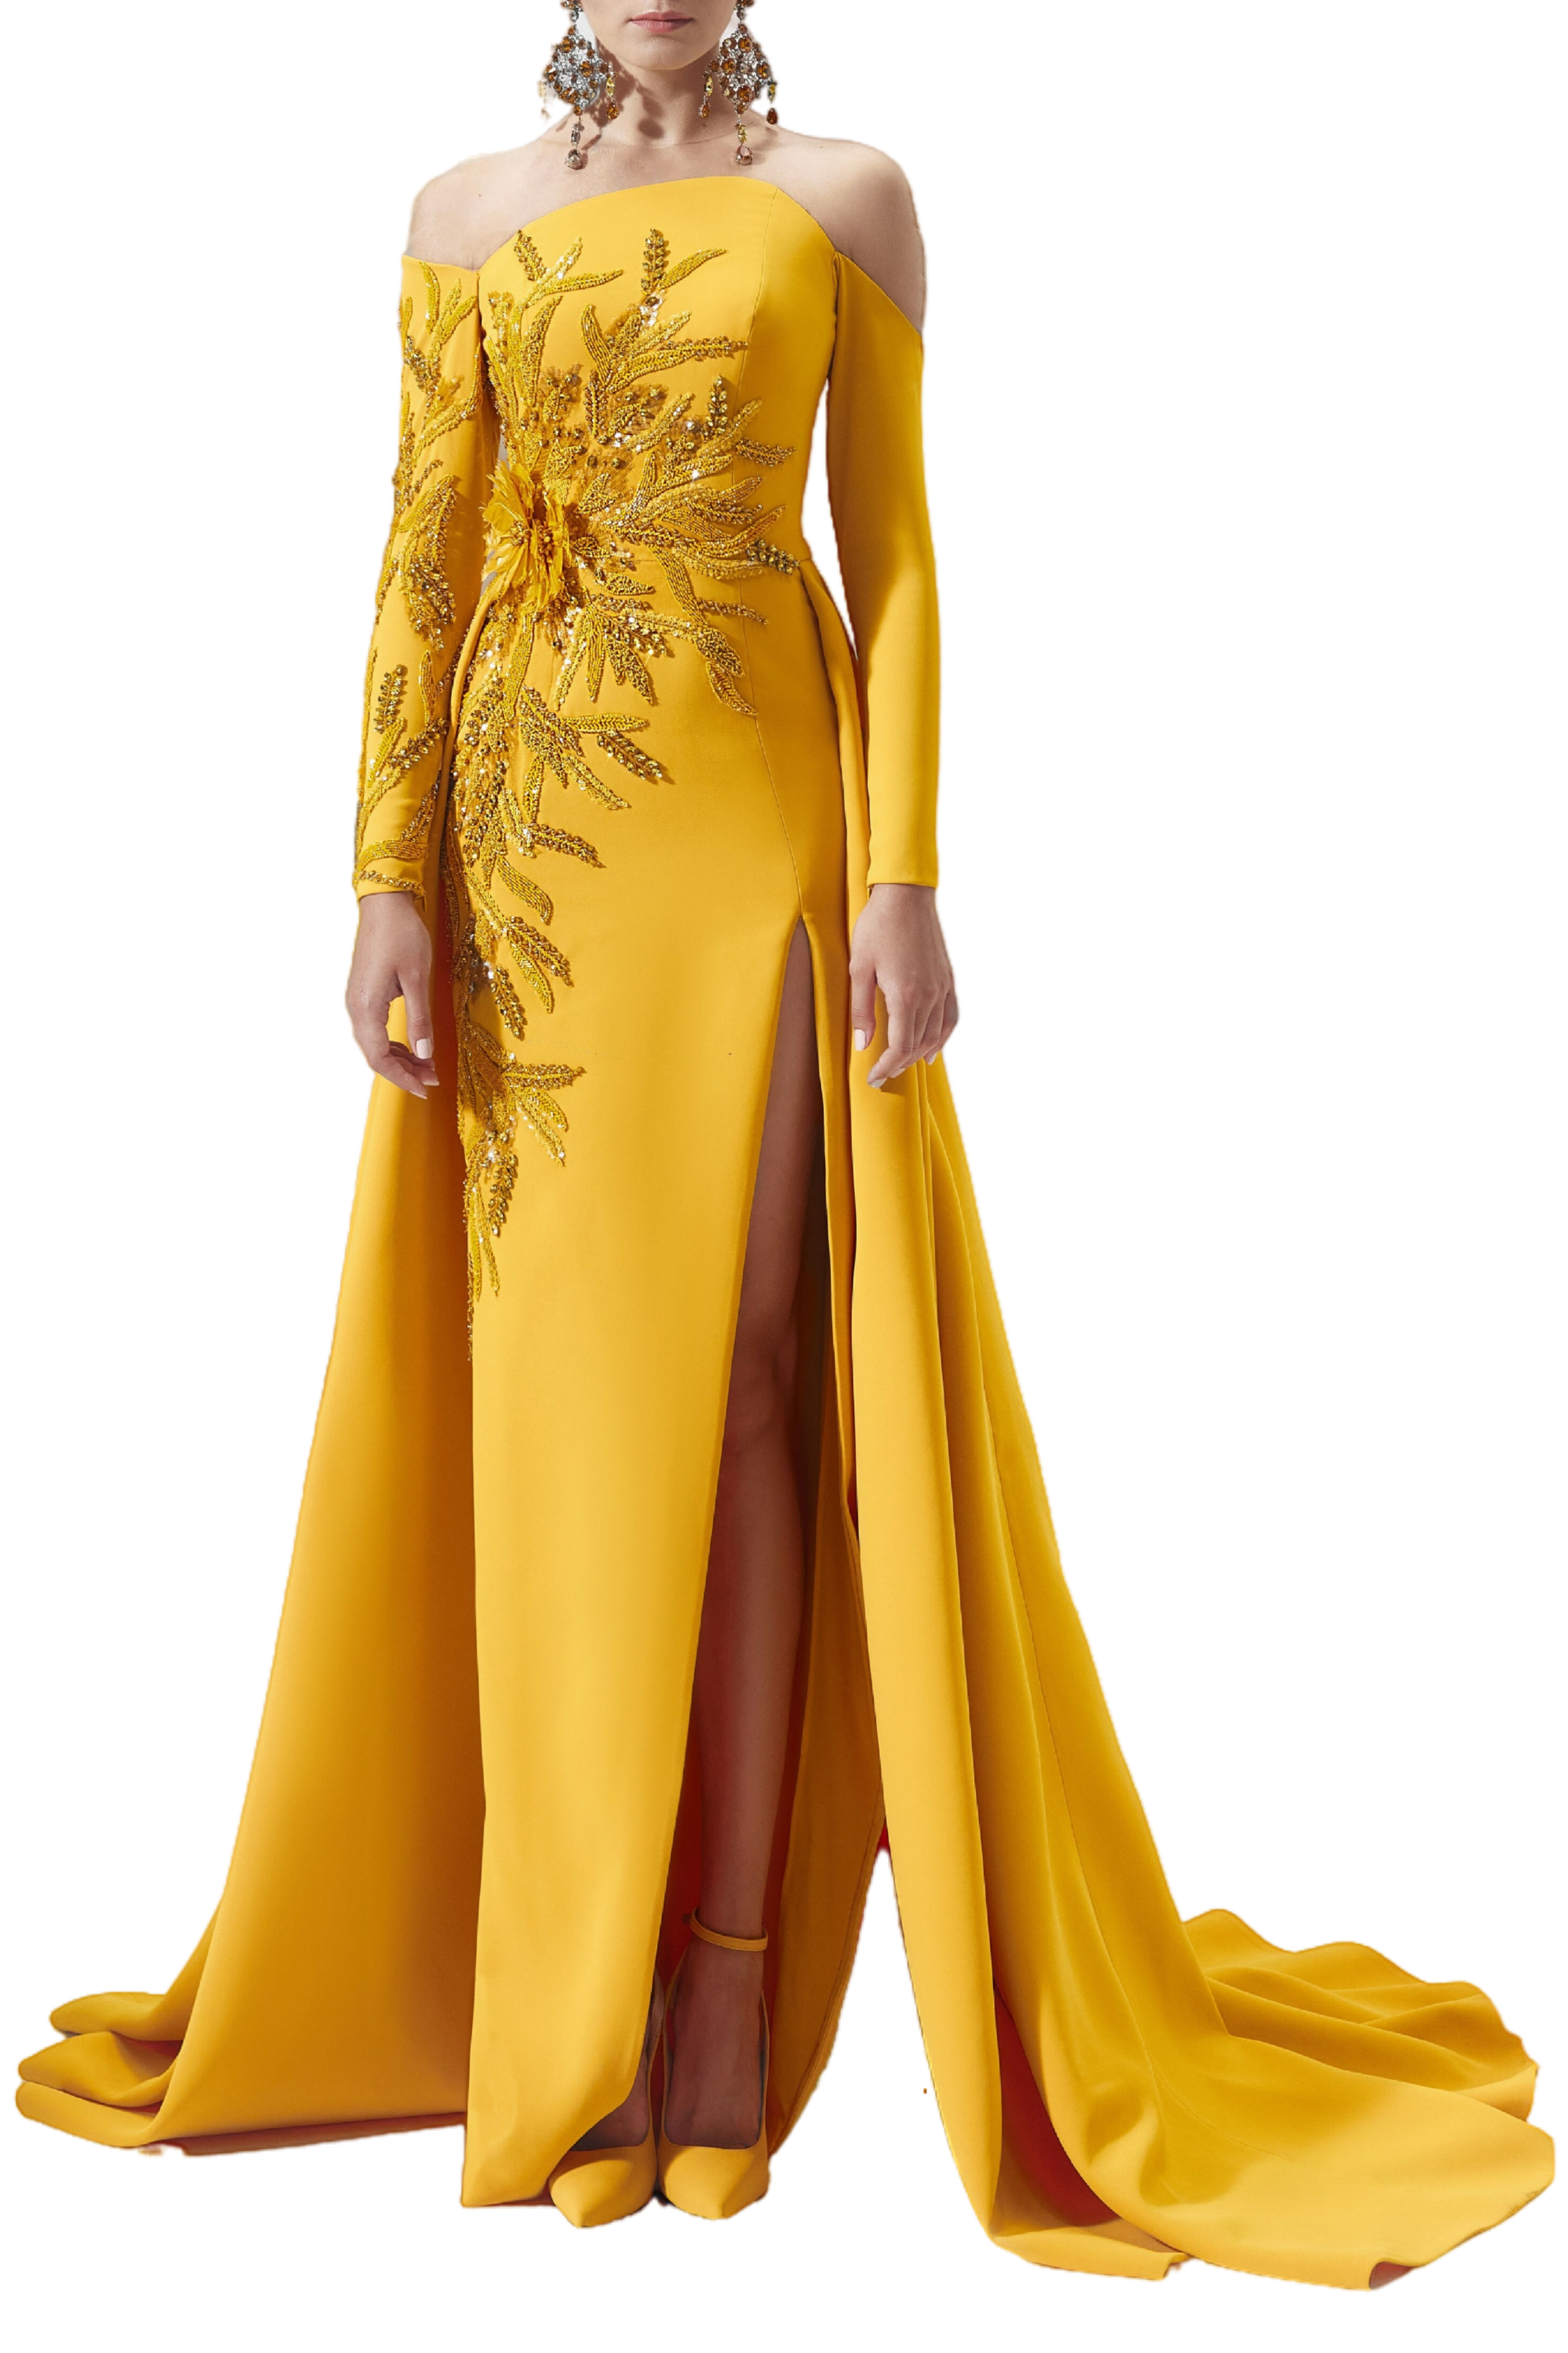 Illusion Long Sleeve Gown